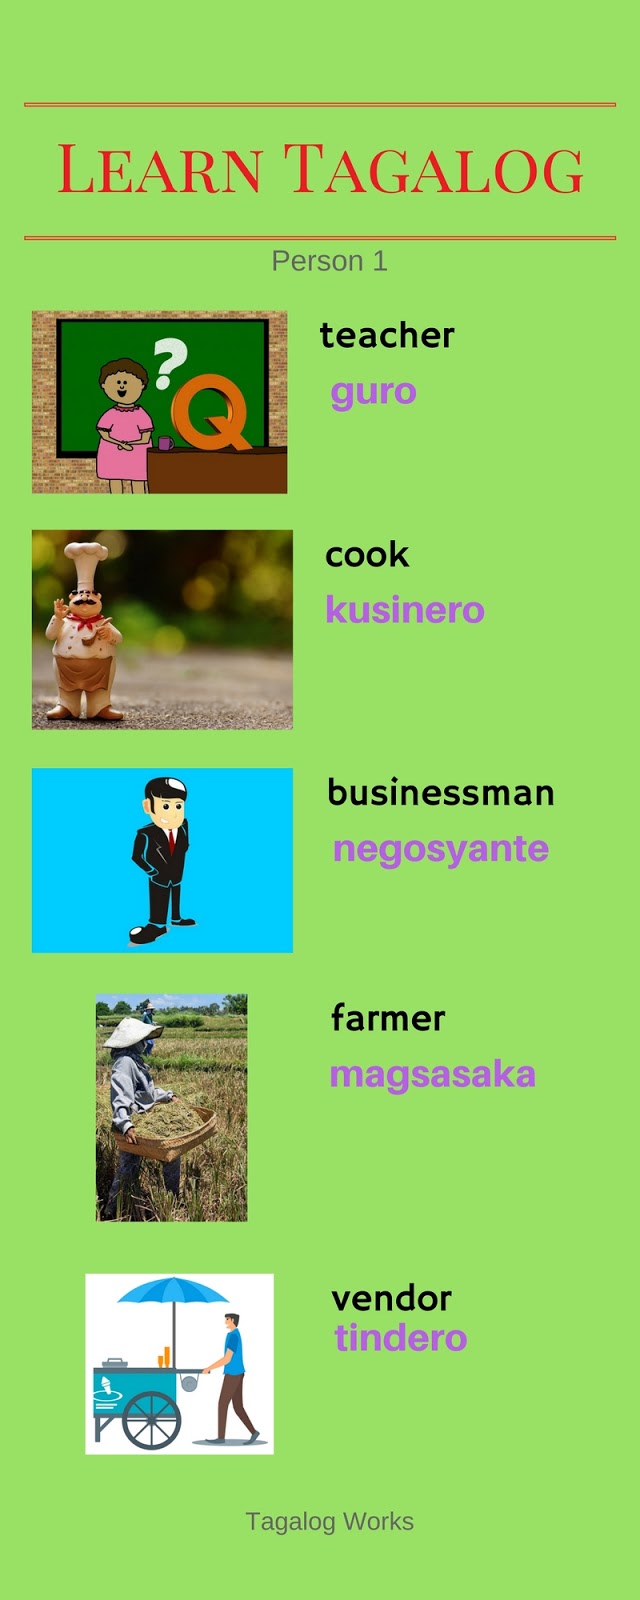 occupations-in-tagalog